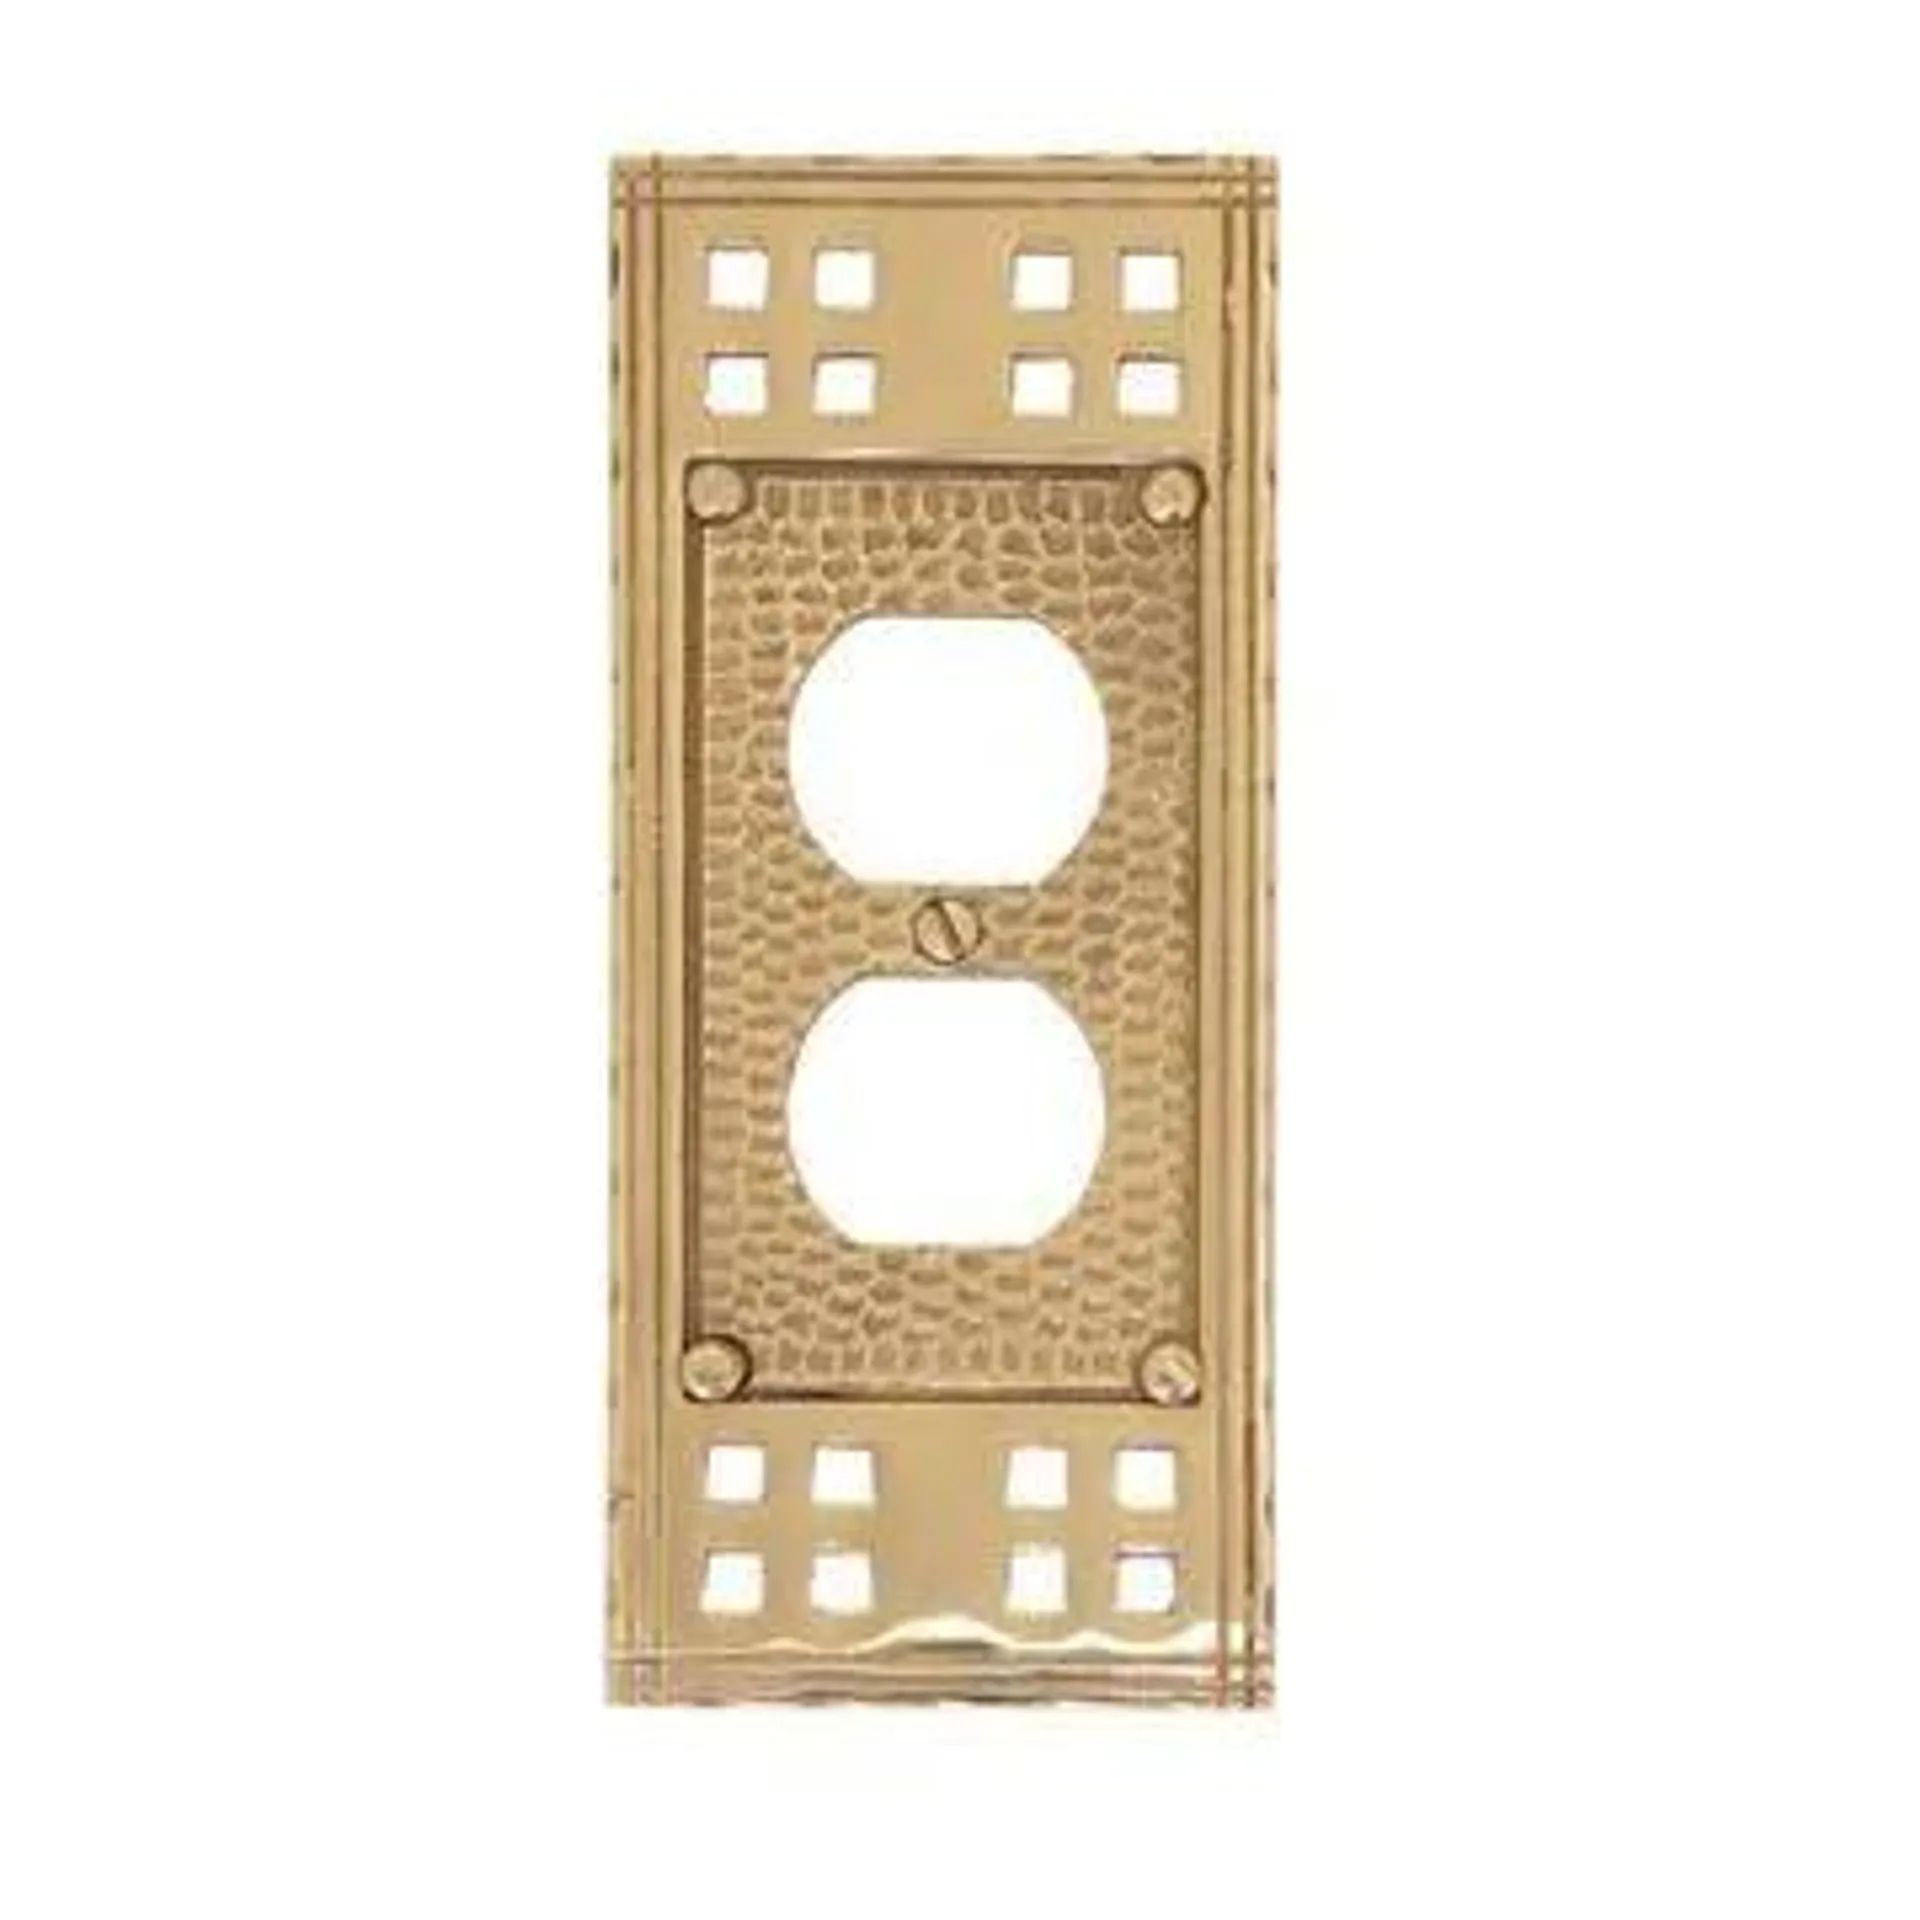 Brass Accents Arts and Crafts Single Duplex Switchplate